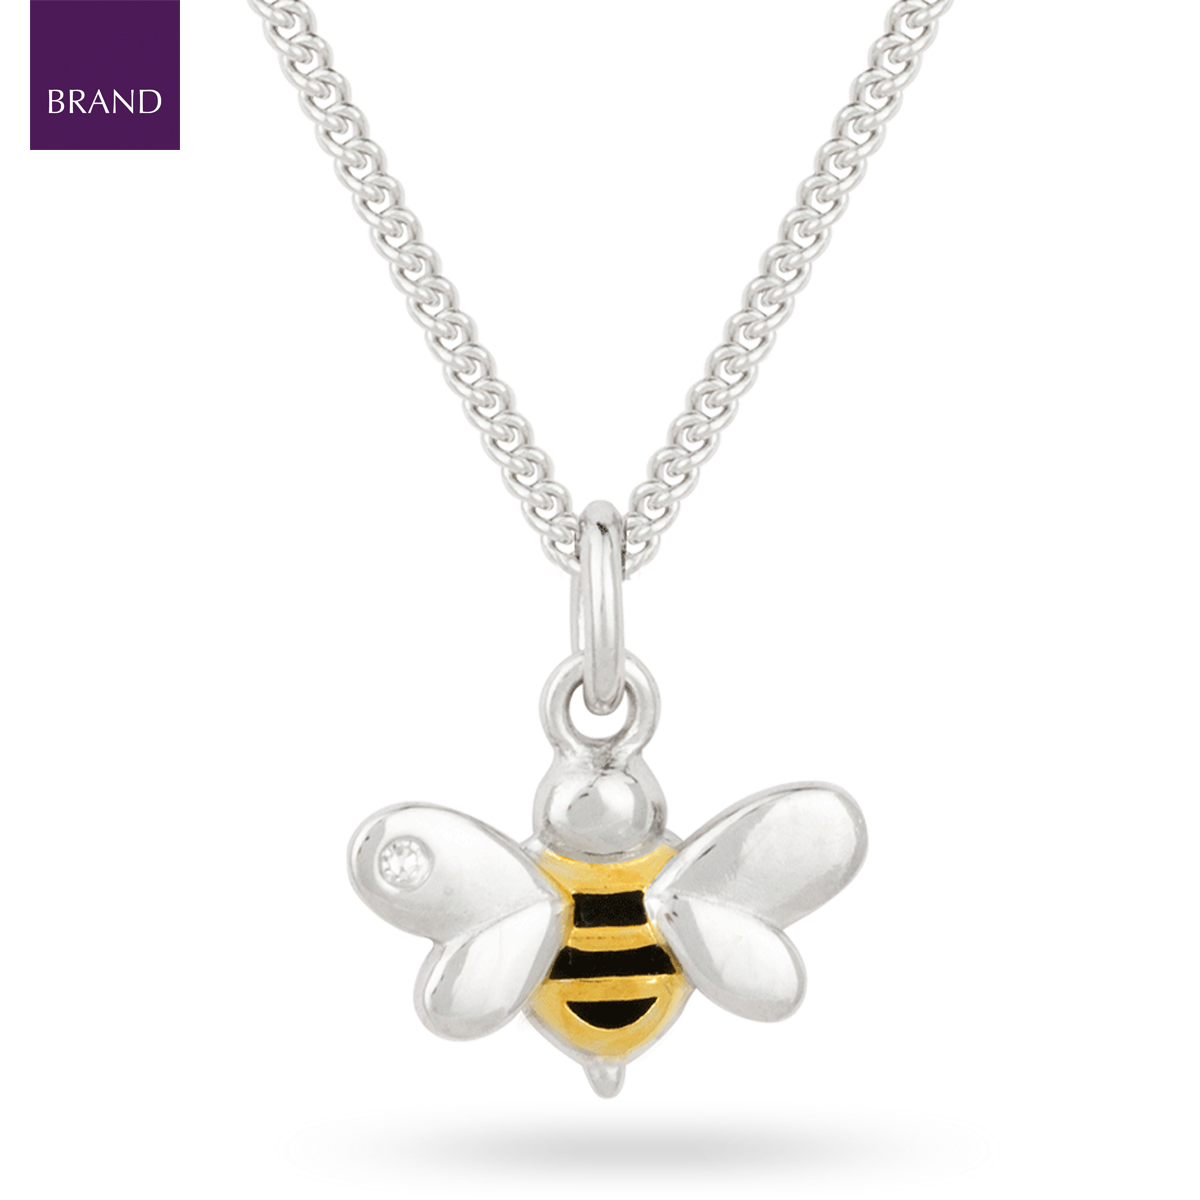 Recycled Sterling Silver Bee Necklace With Yellow Gold Plating, Enamel & Diamond